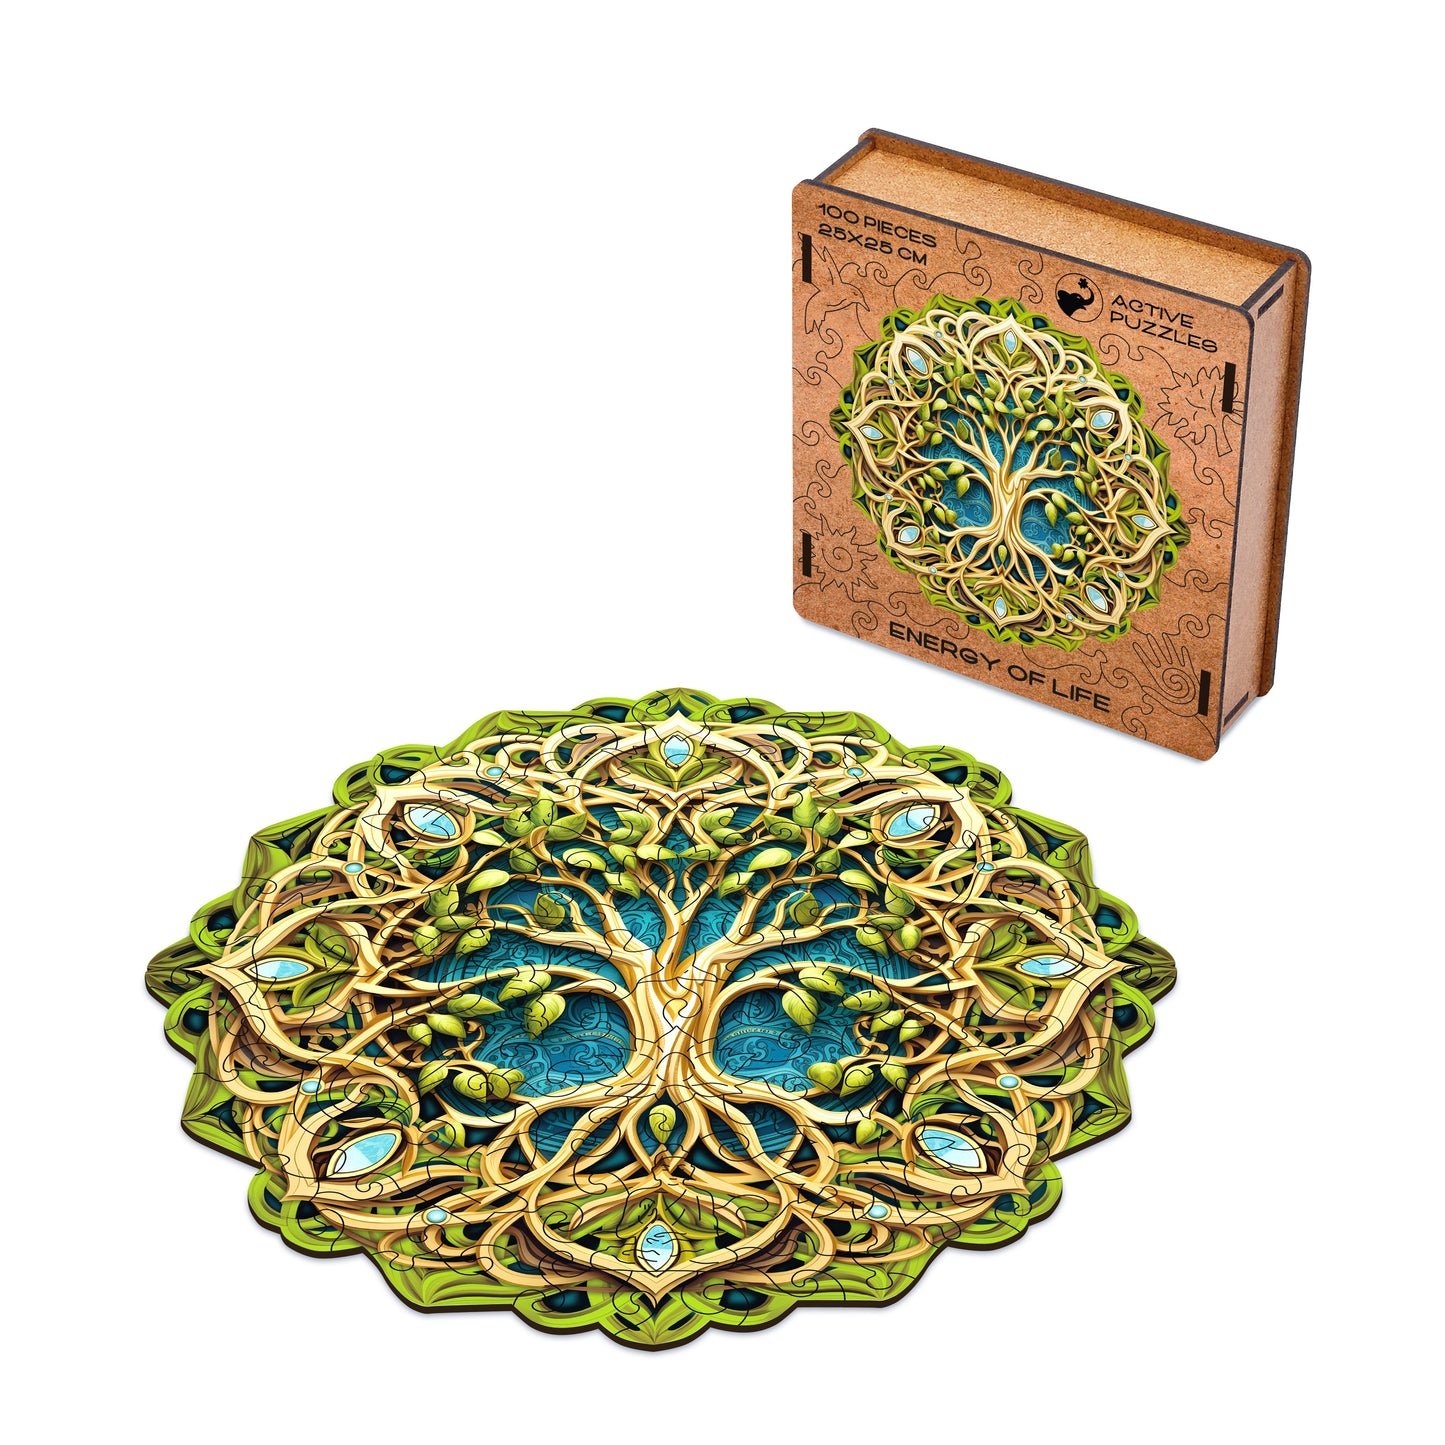 Energy of Life Mandala Wooden Puzzle Active Puzzles